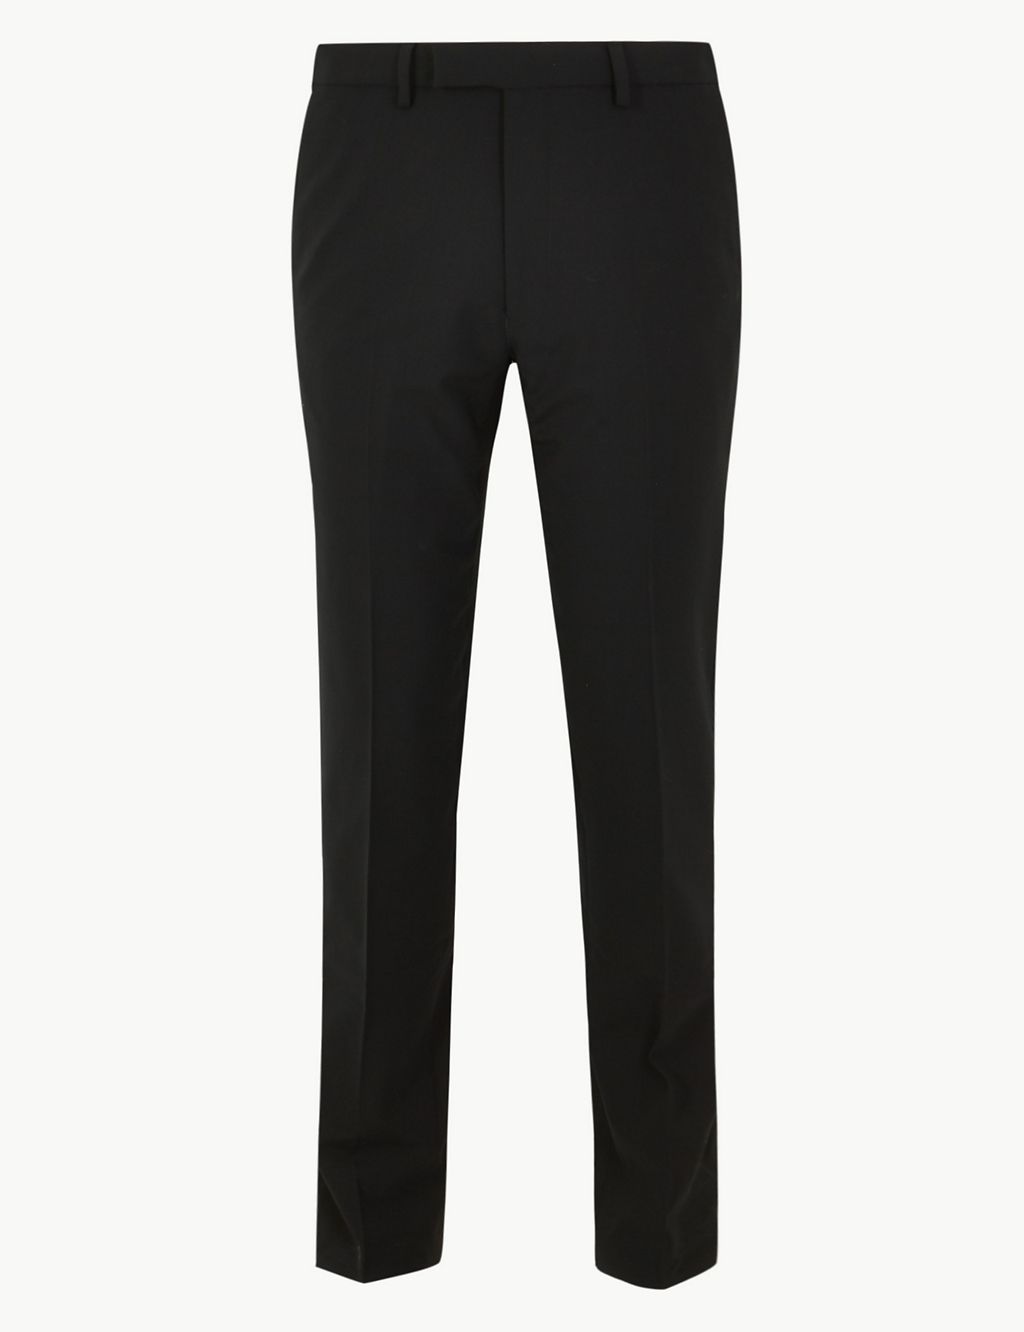 The Ultimate Black Skinny Fit Trousers 1 of 5